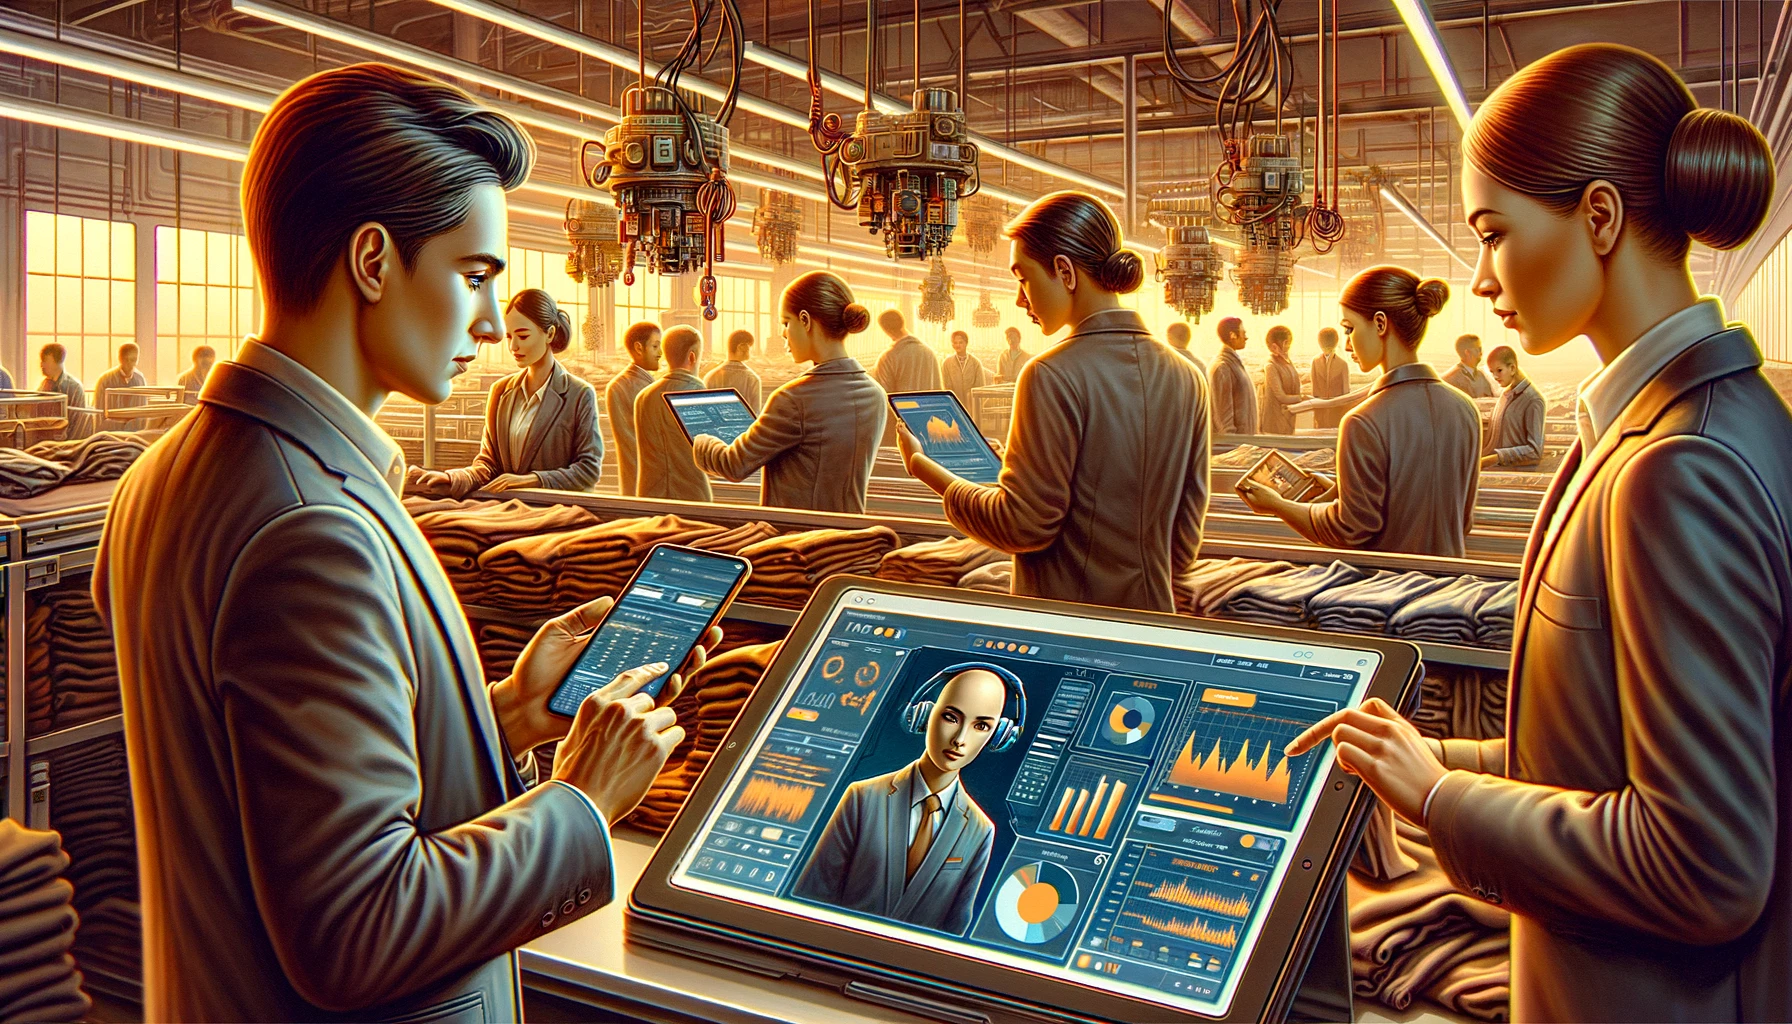 Employees in an apparel manufacturing facility, closely interacting with an AI-powered quality control platform. The illustration captures detailed expressions and the advanced technology they are using, set in a warm and engaging environment.